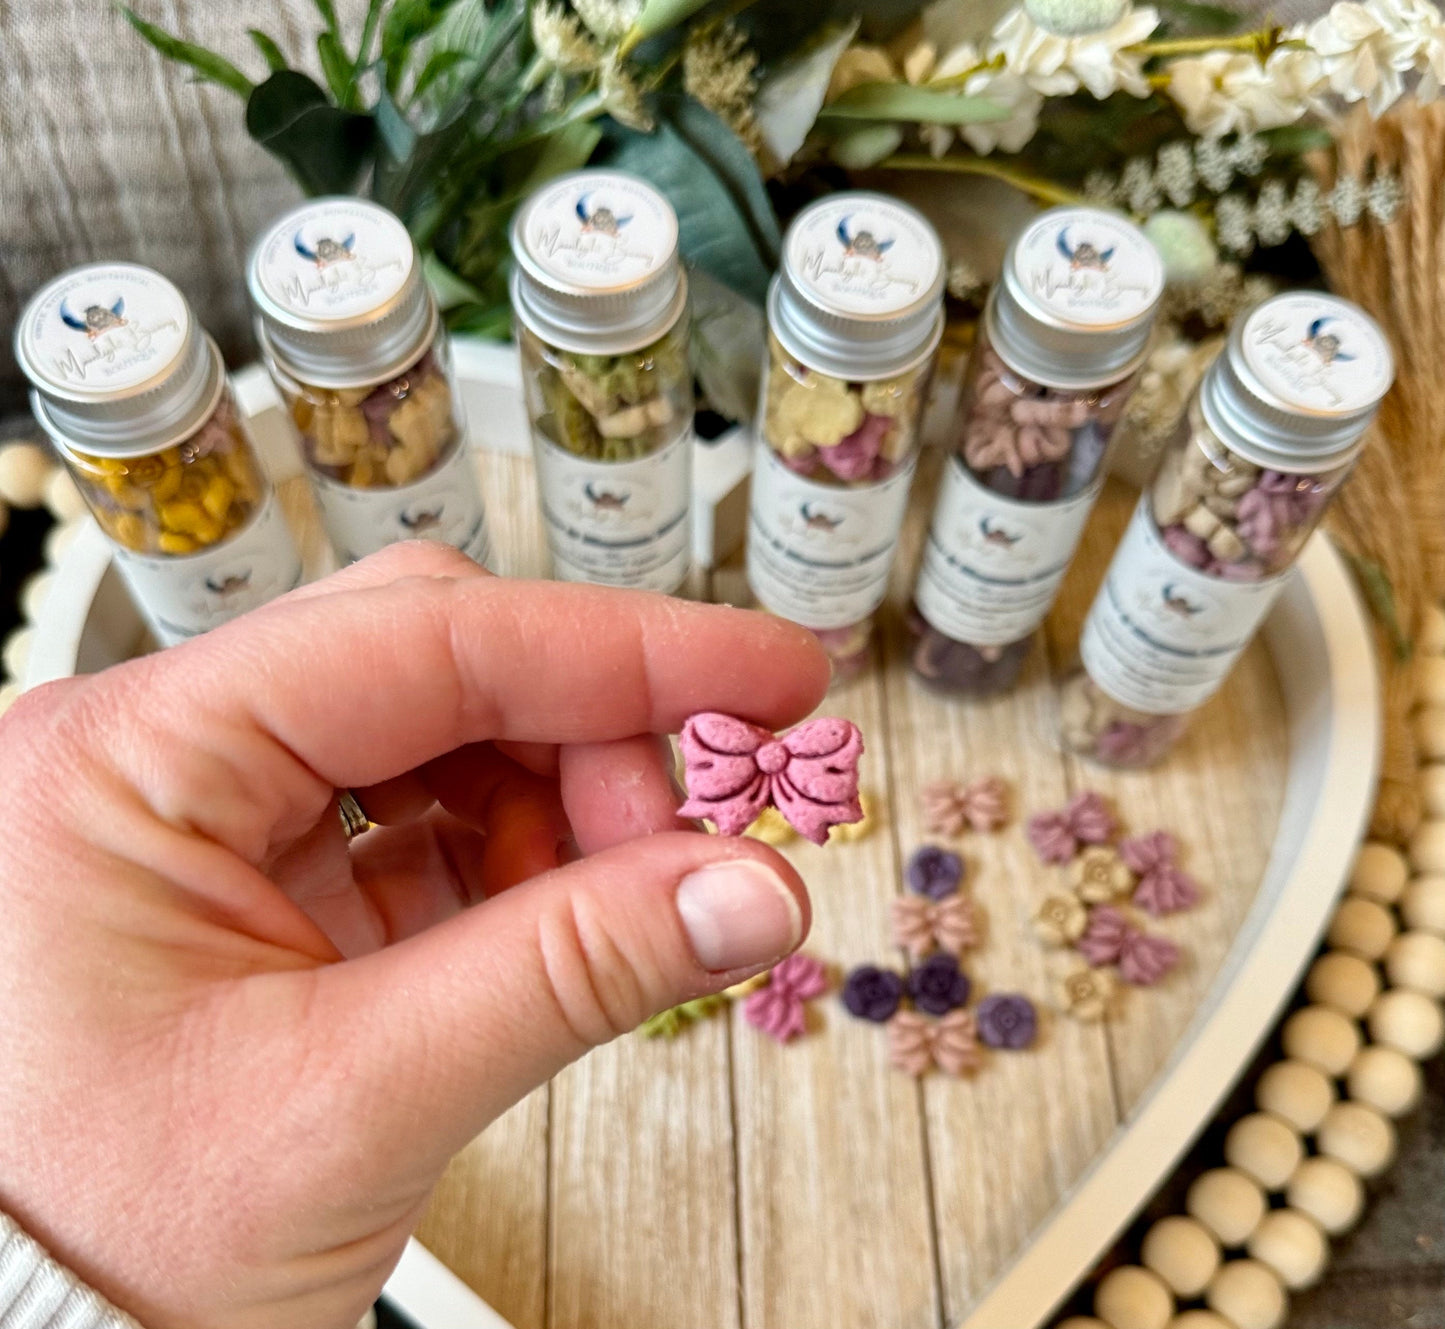 Bow and Blossom Bites | 55+ Delicious Bite Sized Treats for Rabbits, Guinea Pigs, Hamsters, Mice, and Small Pets, Natural, Healthy & Organic